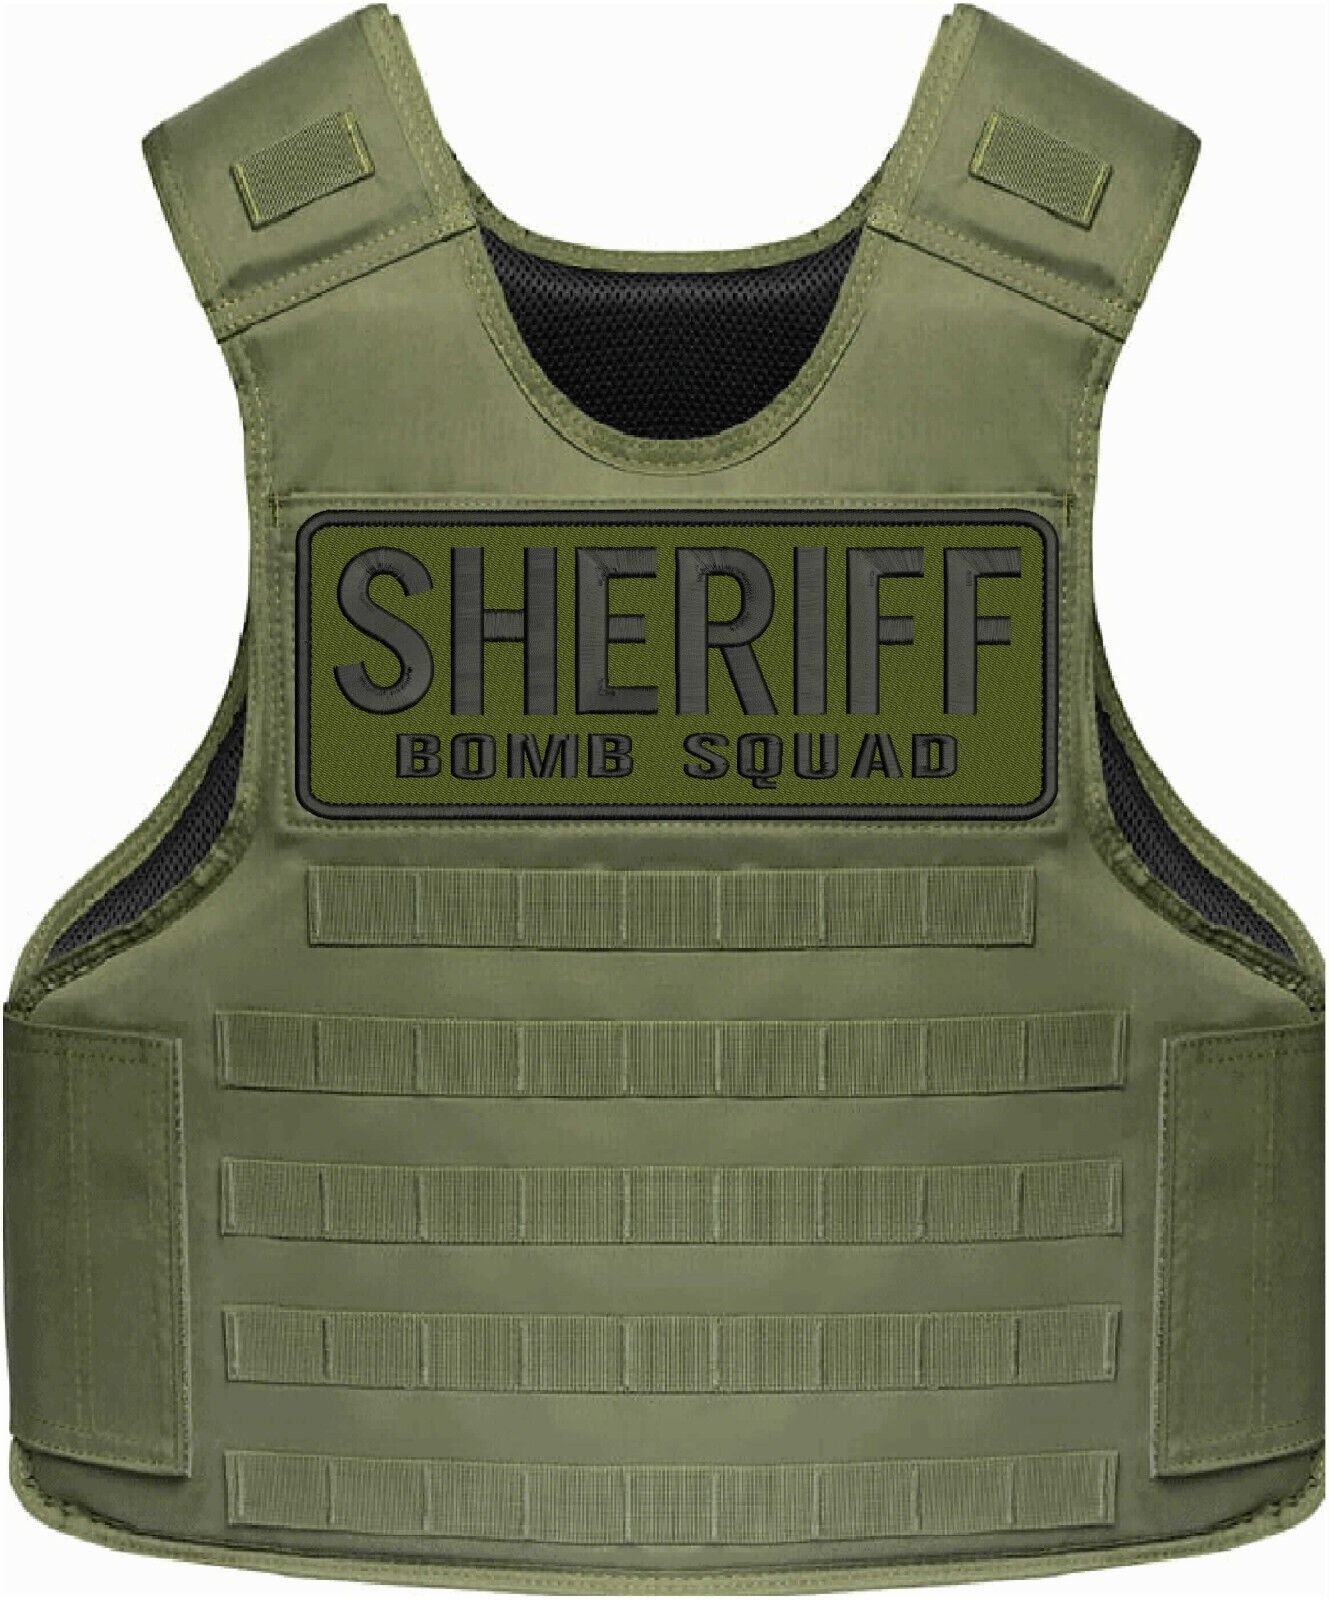 SHERIFF BOMB SQUAD EMBROIDERY PATCH 4X10 3/4 VELCR@ ON BACK BLACK ON  OD GREEN